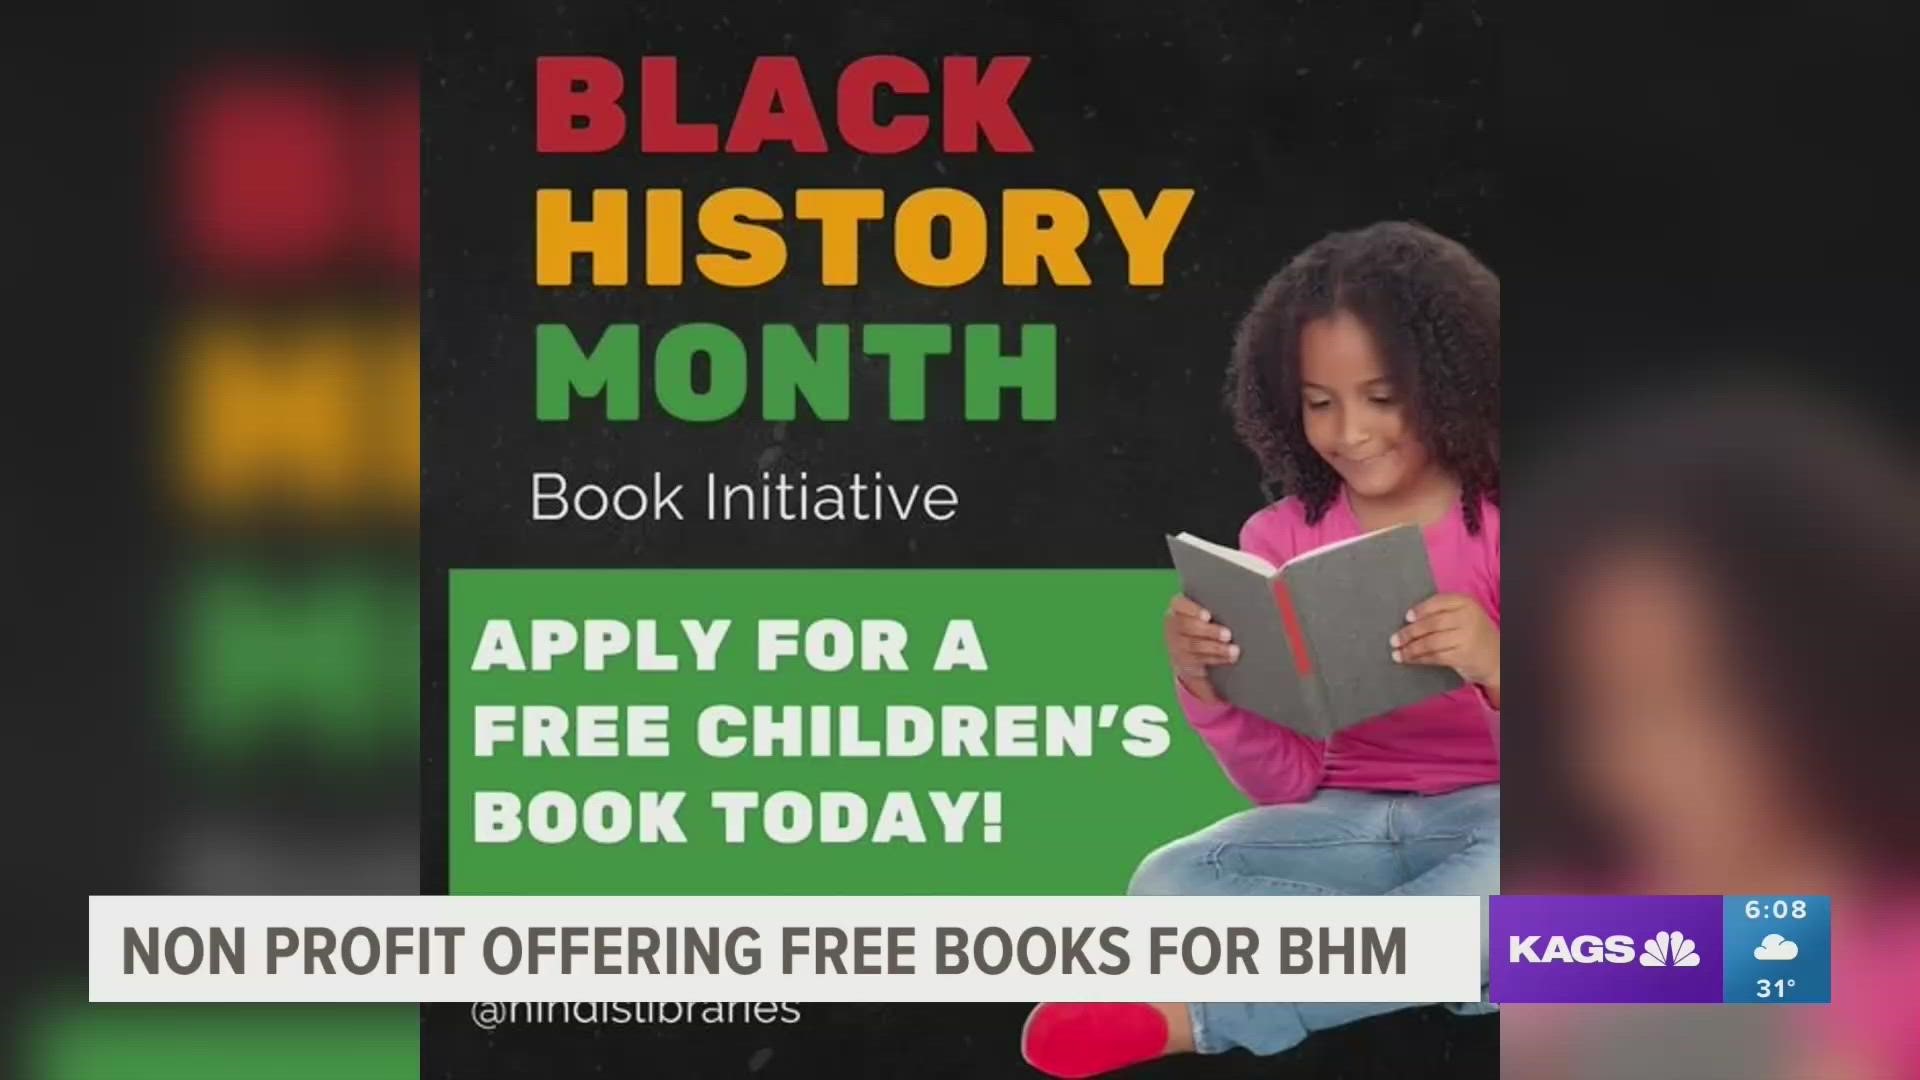 Hindi's Libraries is a non-profit based in New York that is offering free books to any school district or Title 1 school throughout Black History Month.